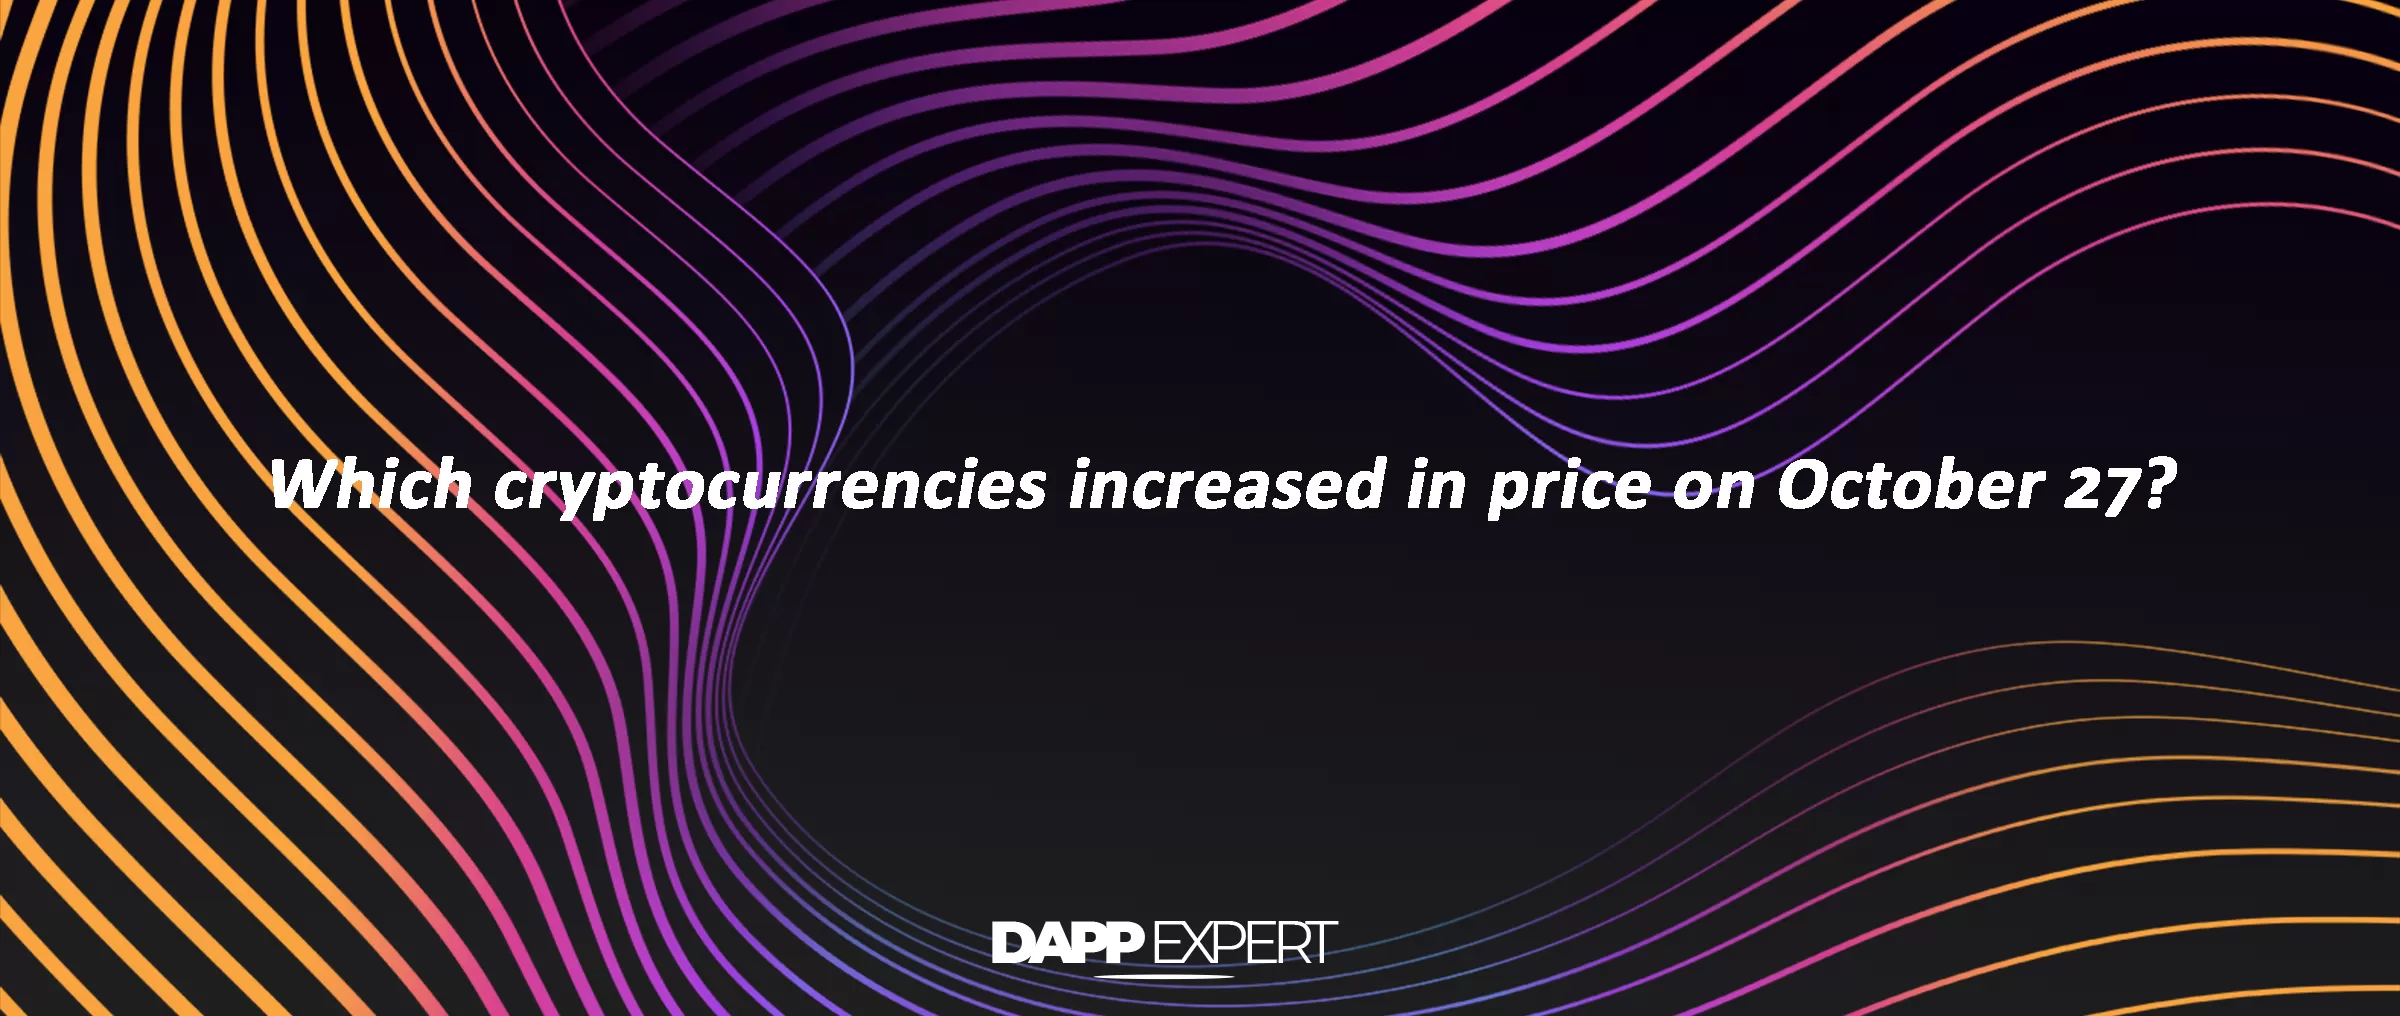 Which cryptocurrencies increased in price on October 27?